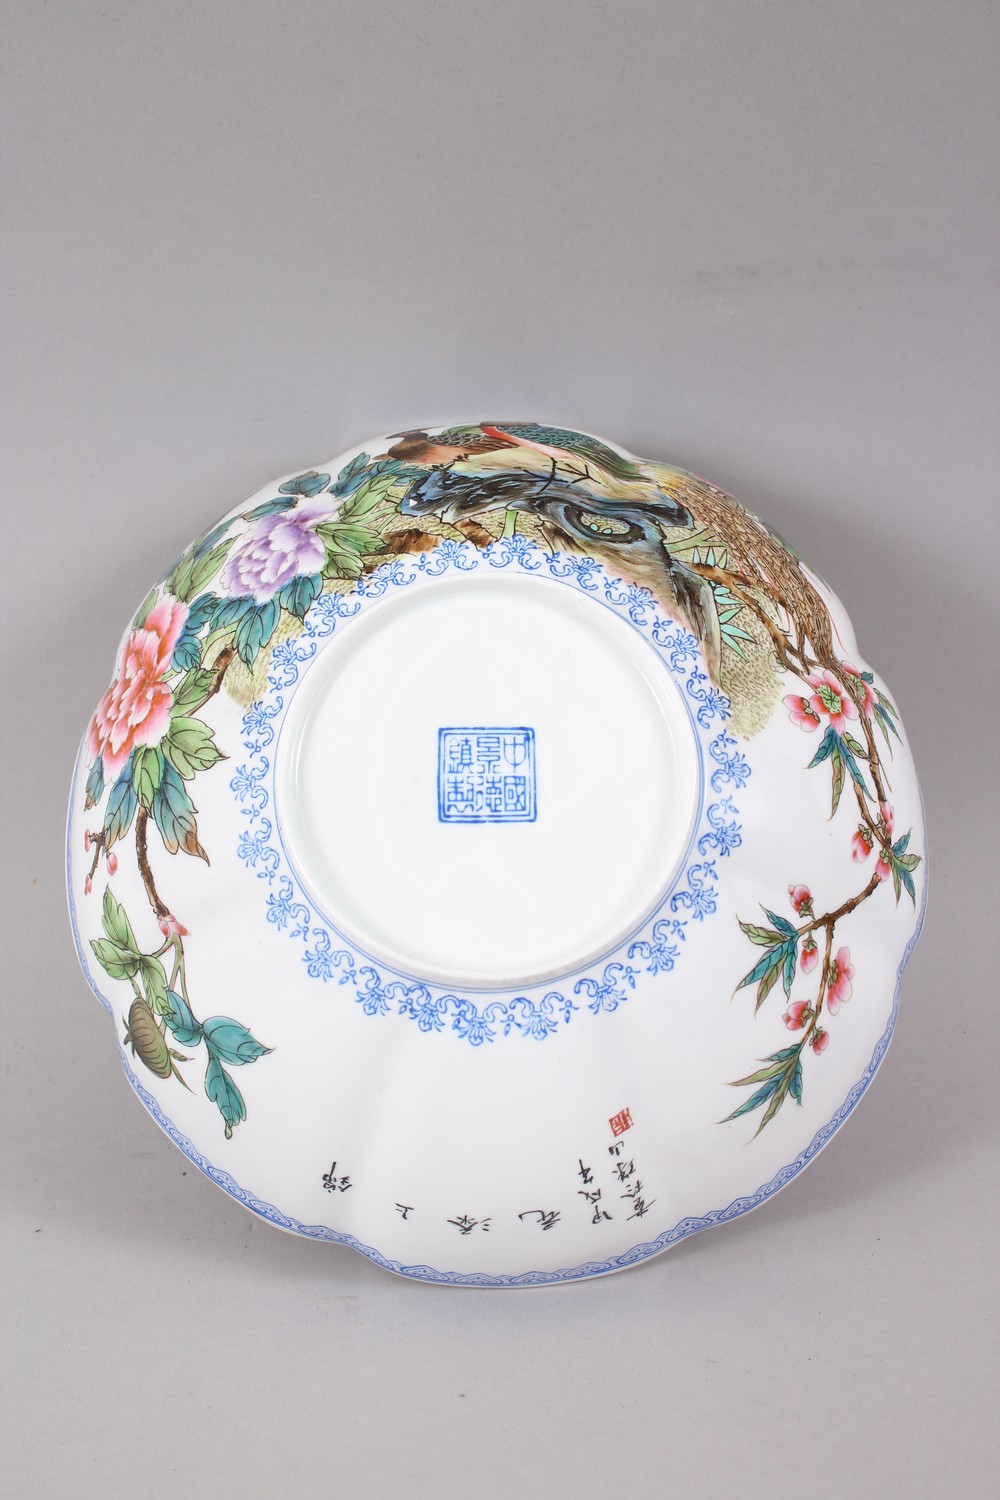 A GOOD CHINESE 20TH CENTURY EGGSHELL PORCELAIN BOWL, decorated with scenes of lotus flowers and blue - Image 5 of 6